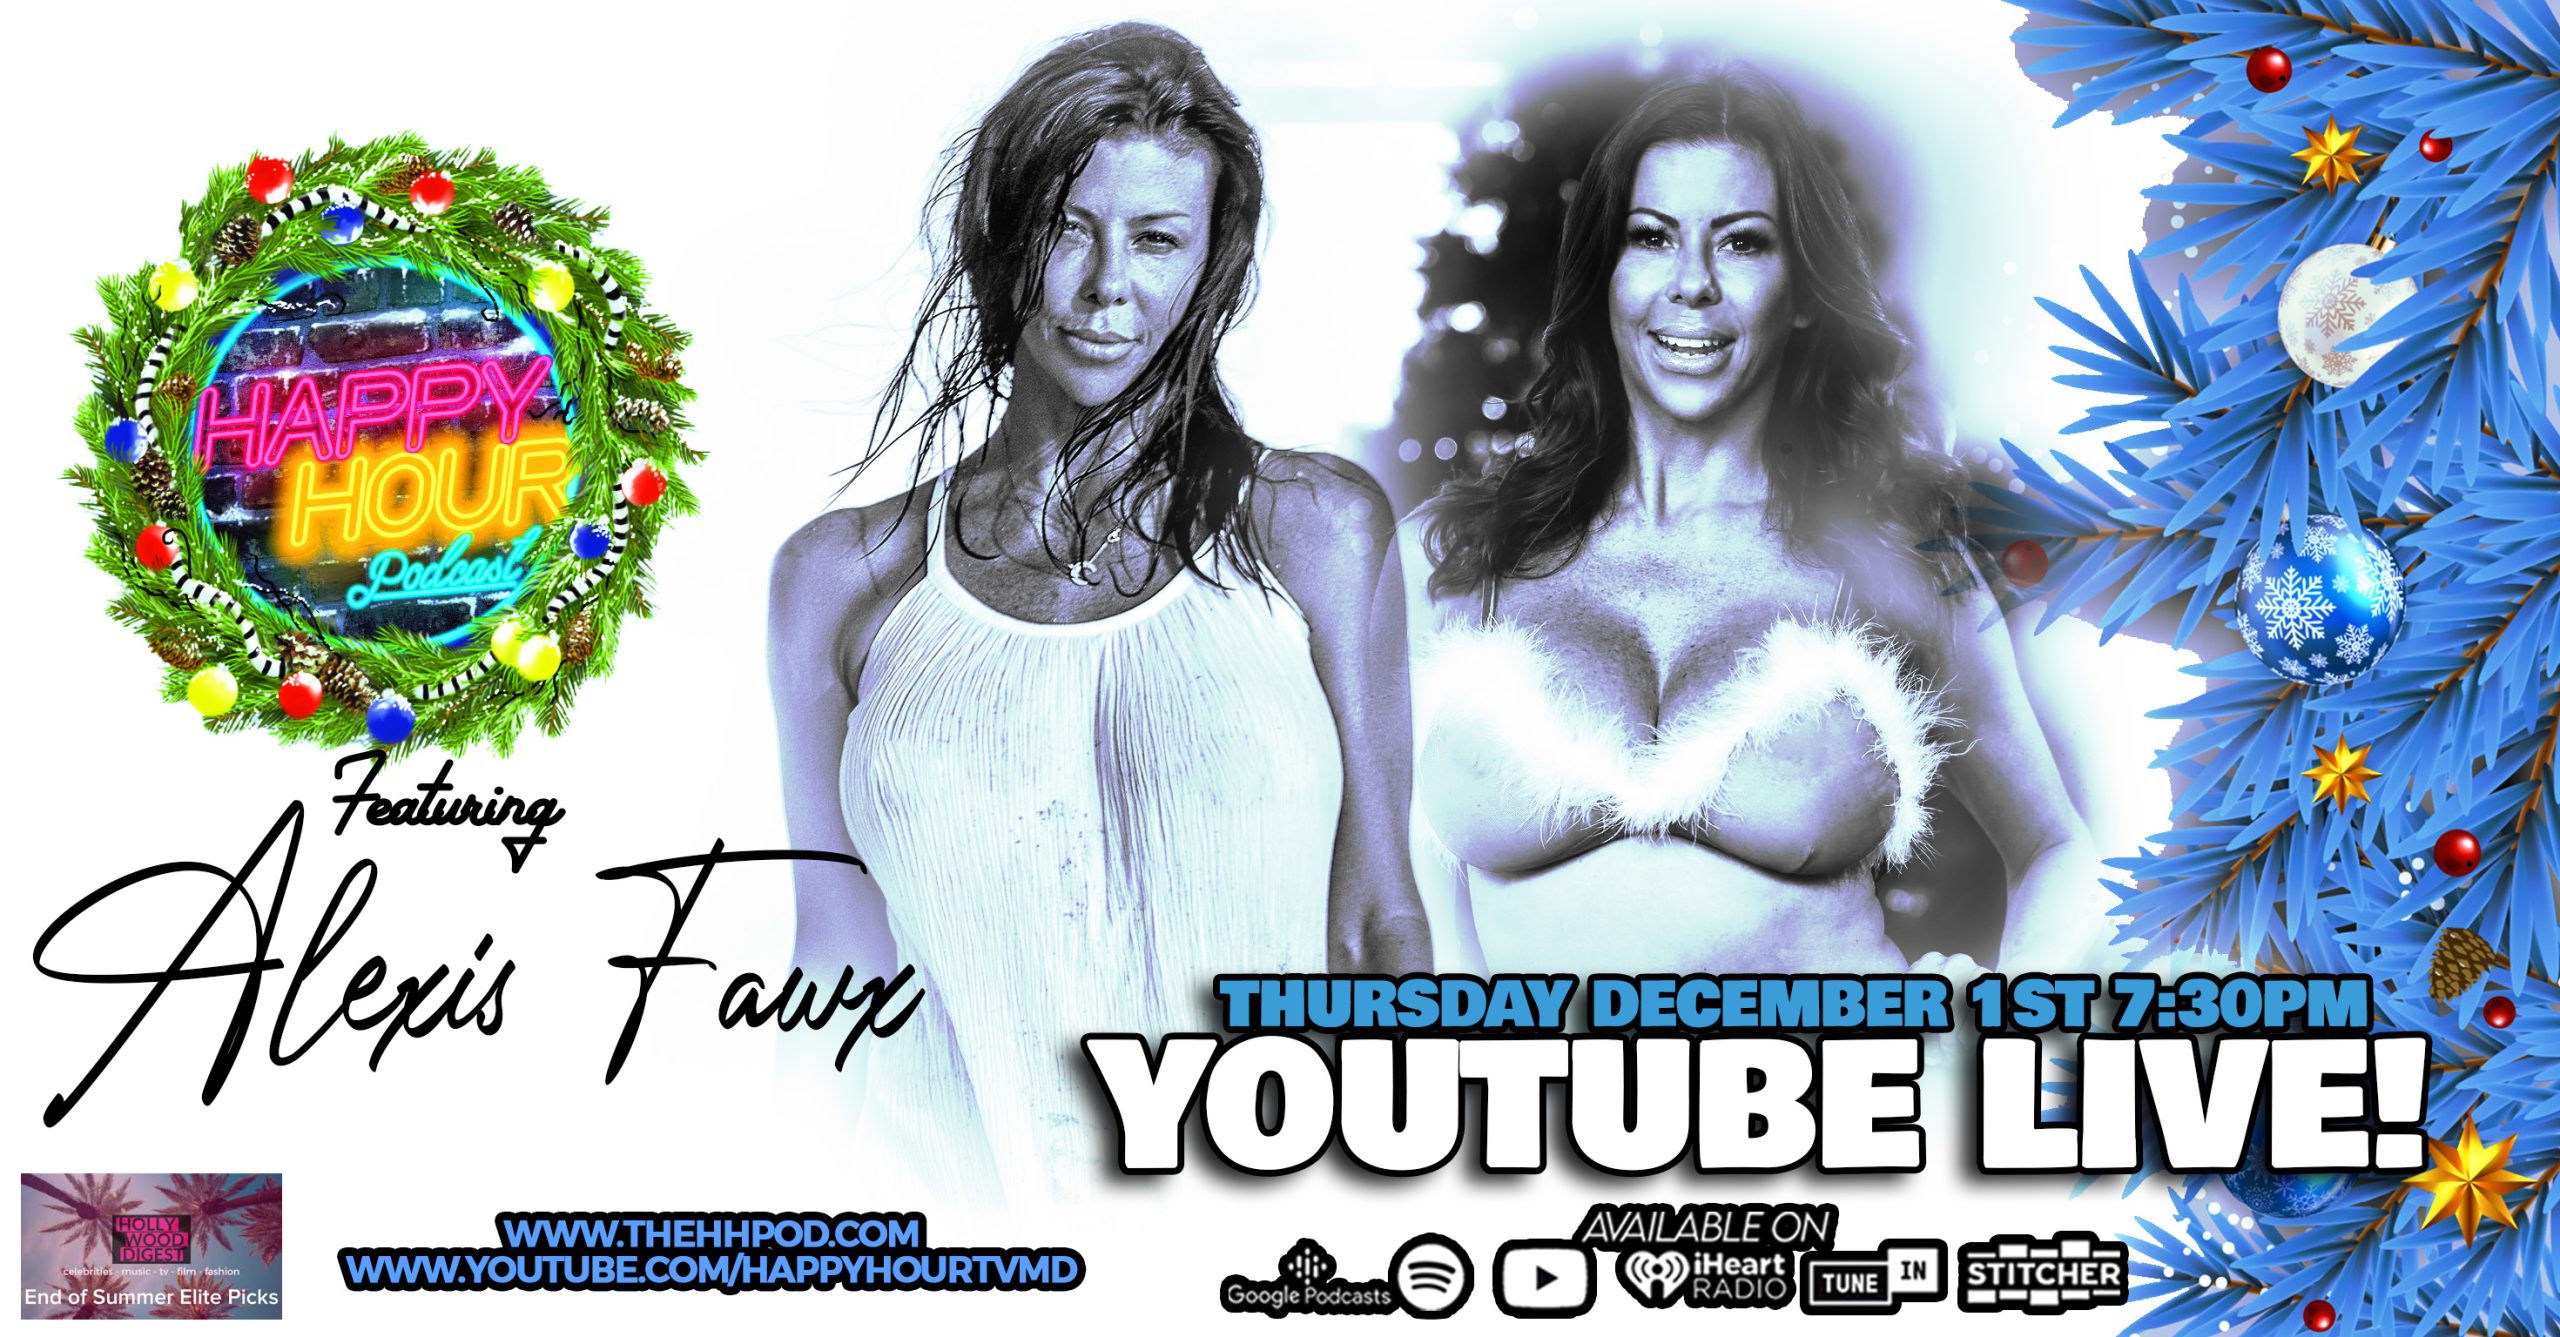 Featuring Alexis Fawx Youtube Live 12/1 7:30pm Plus All Major Podcast Platforms